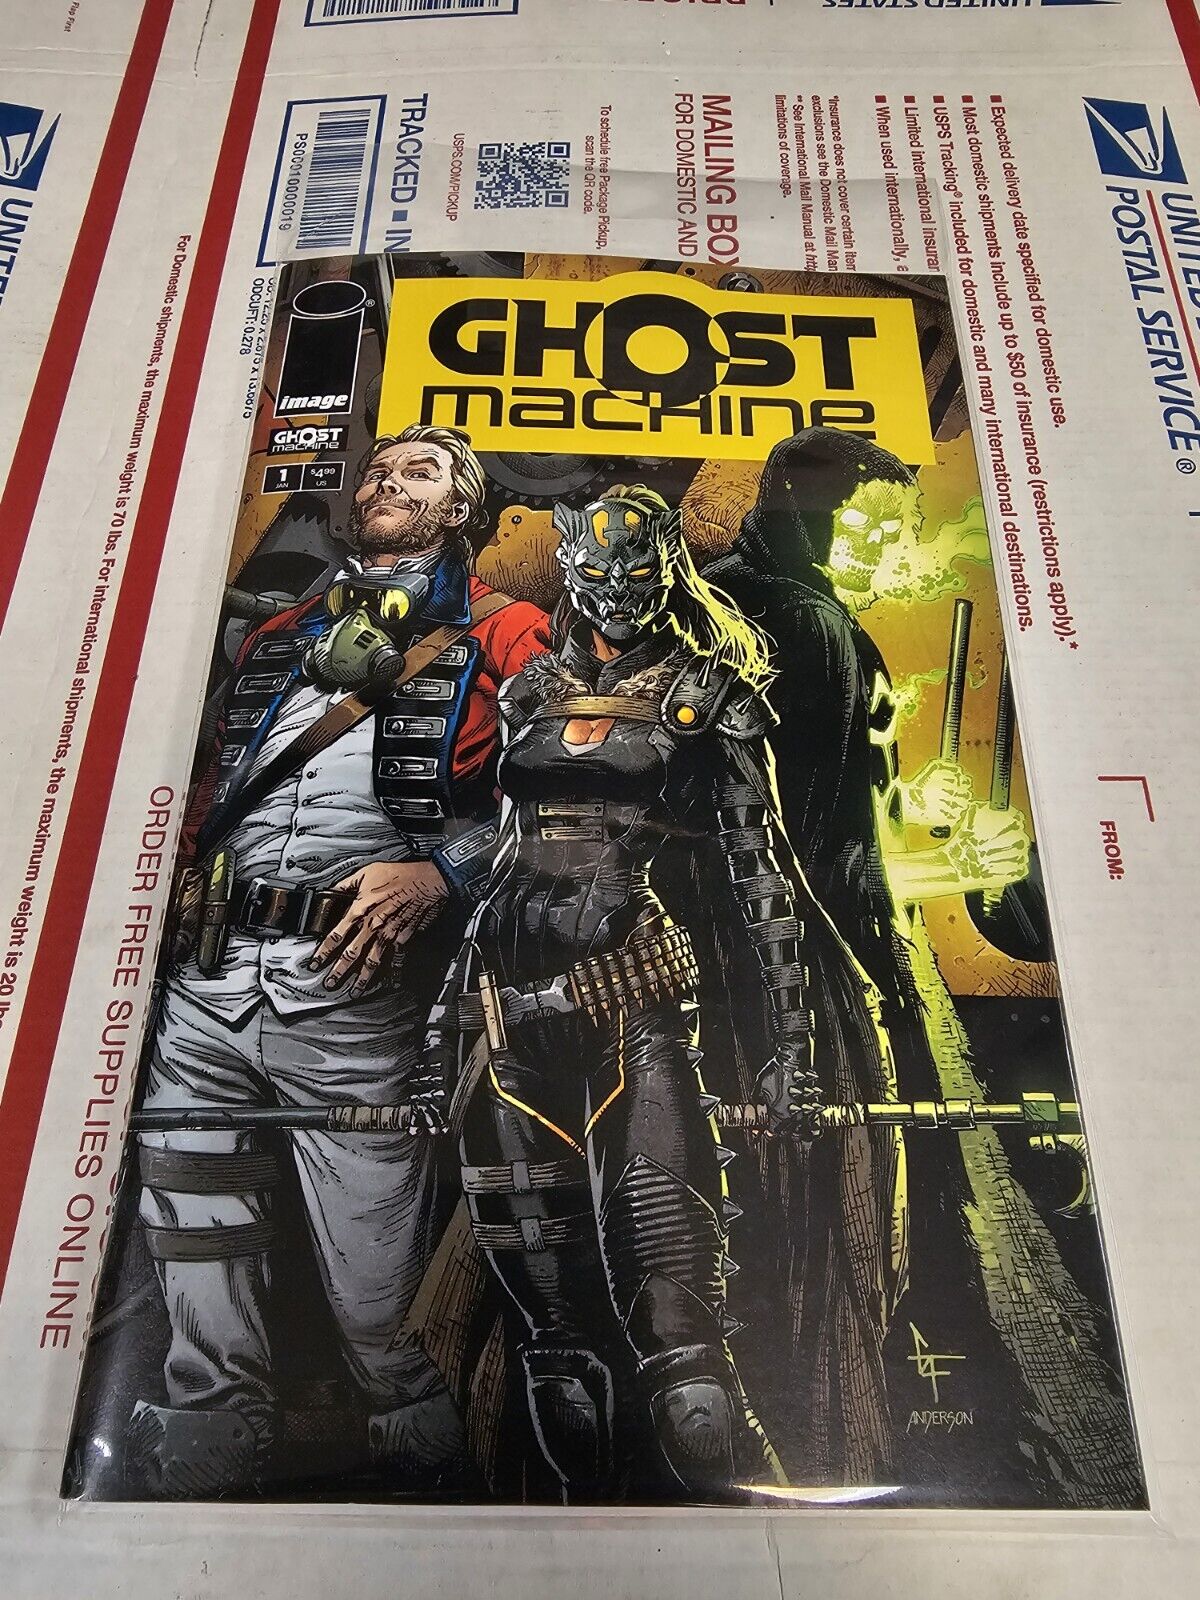 GHOST MACHINE #1 (IMAGE 2024) Gary Frank Cover A 1st Print NM- OR BETTER